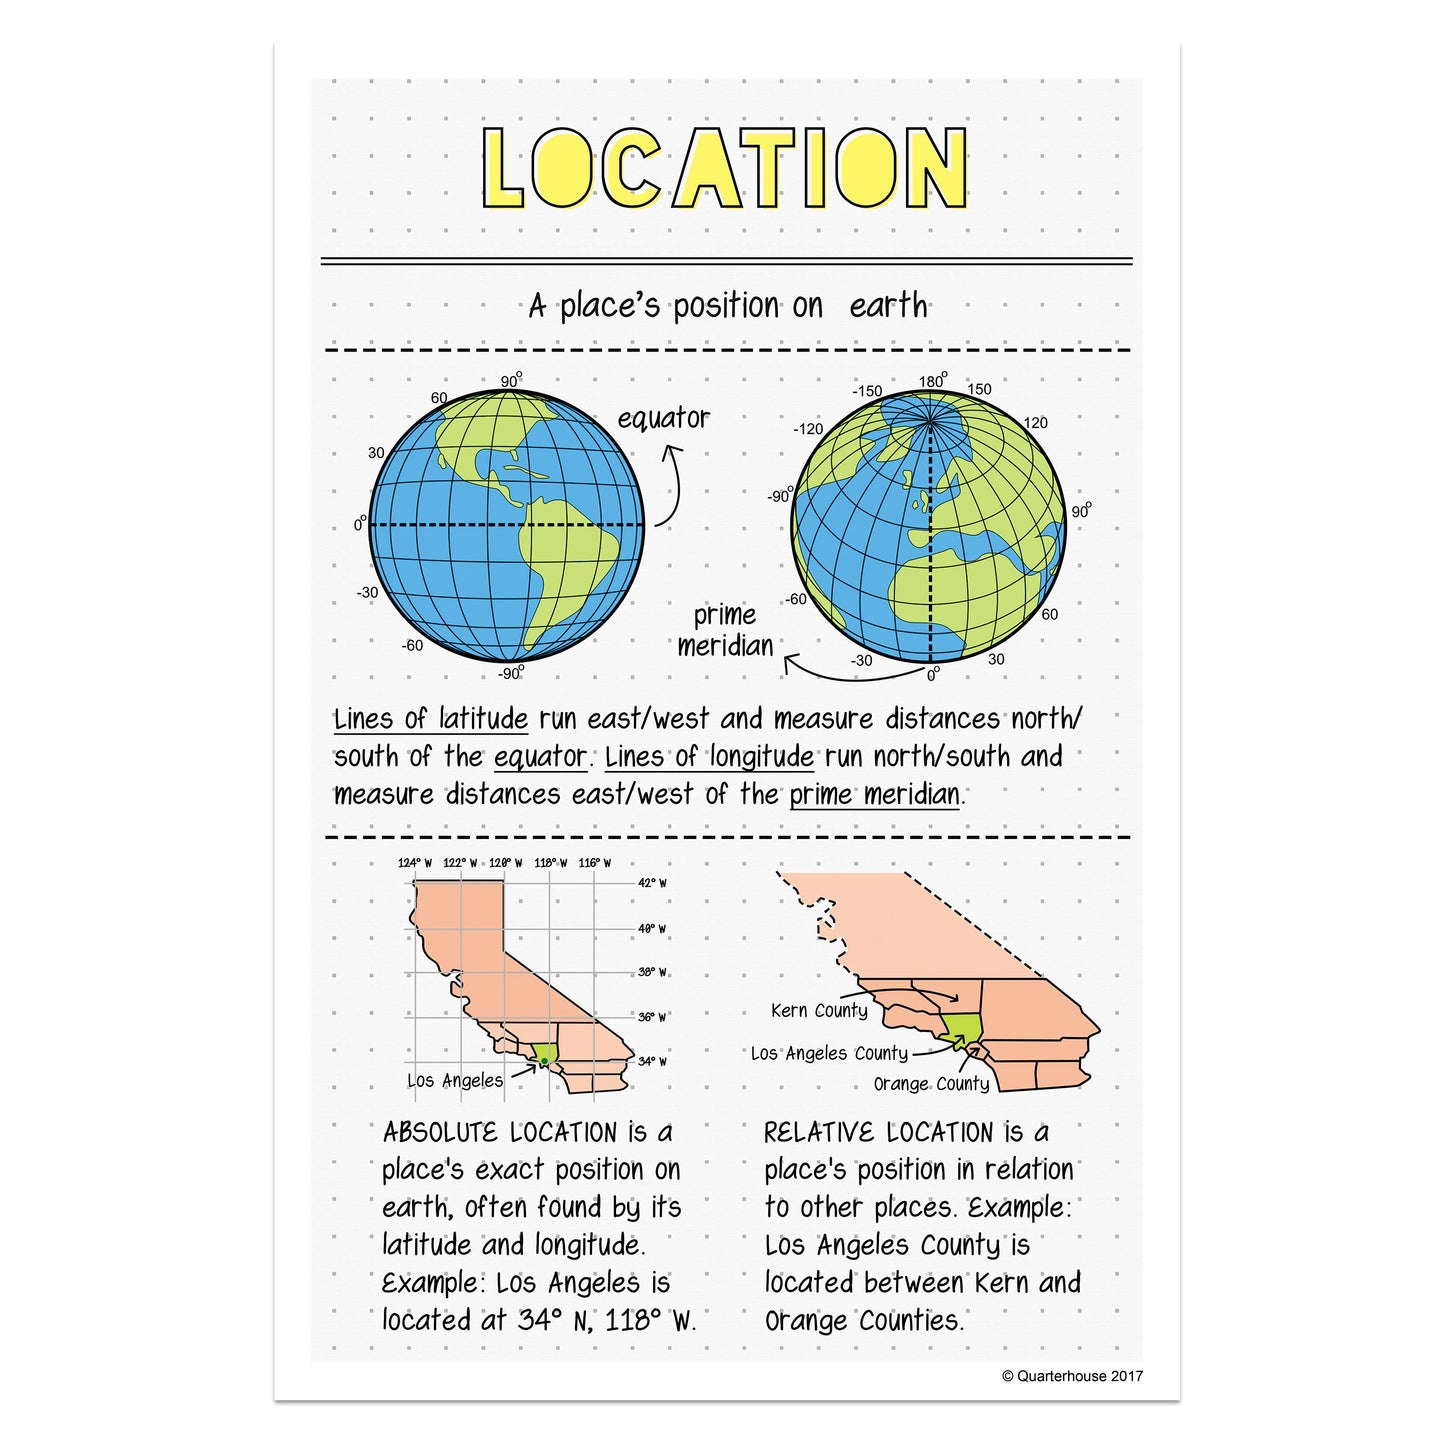 Quarterhouse 5 Themes of Geography - Location Poster, Social Studies Classroom Materials for Teachers